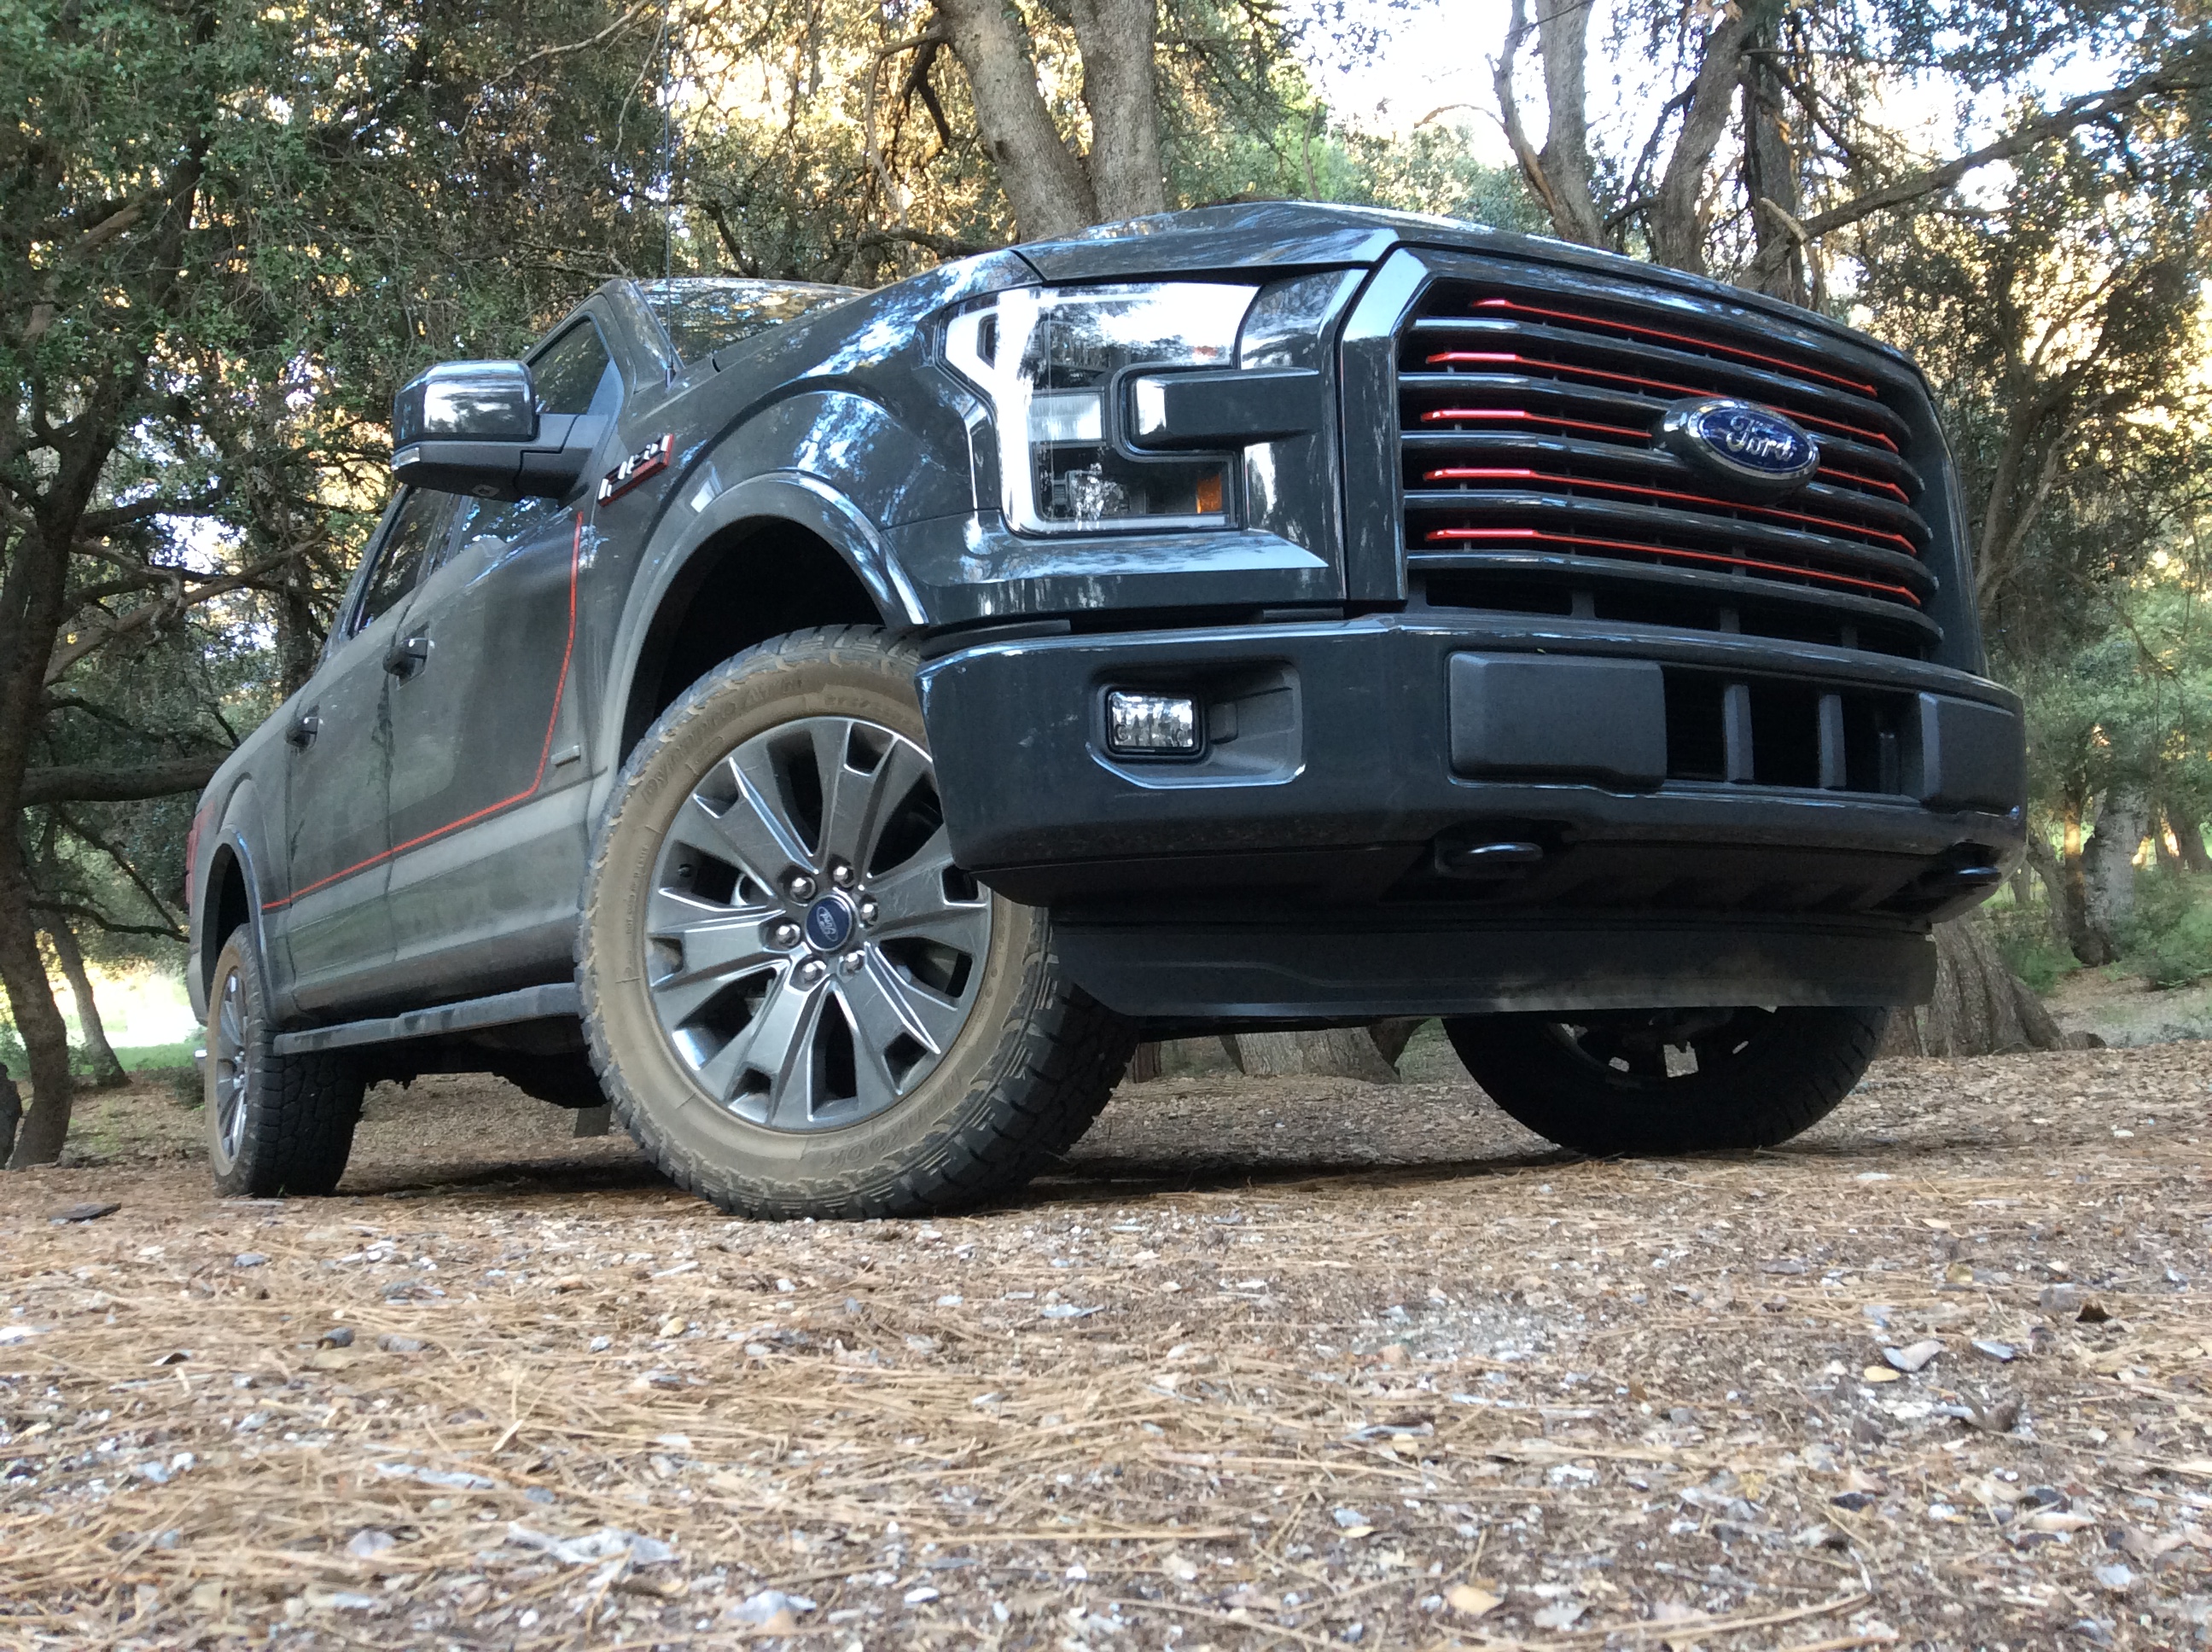 Grab a 2016 F-150 Now or Wait for the 2017 F-150?